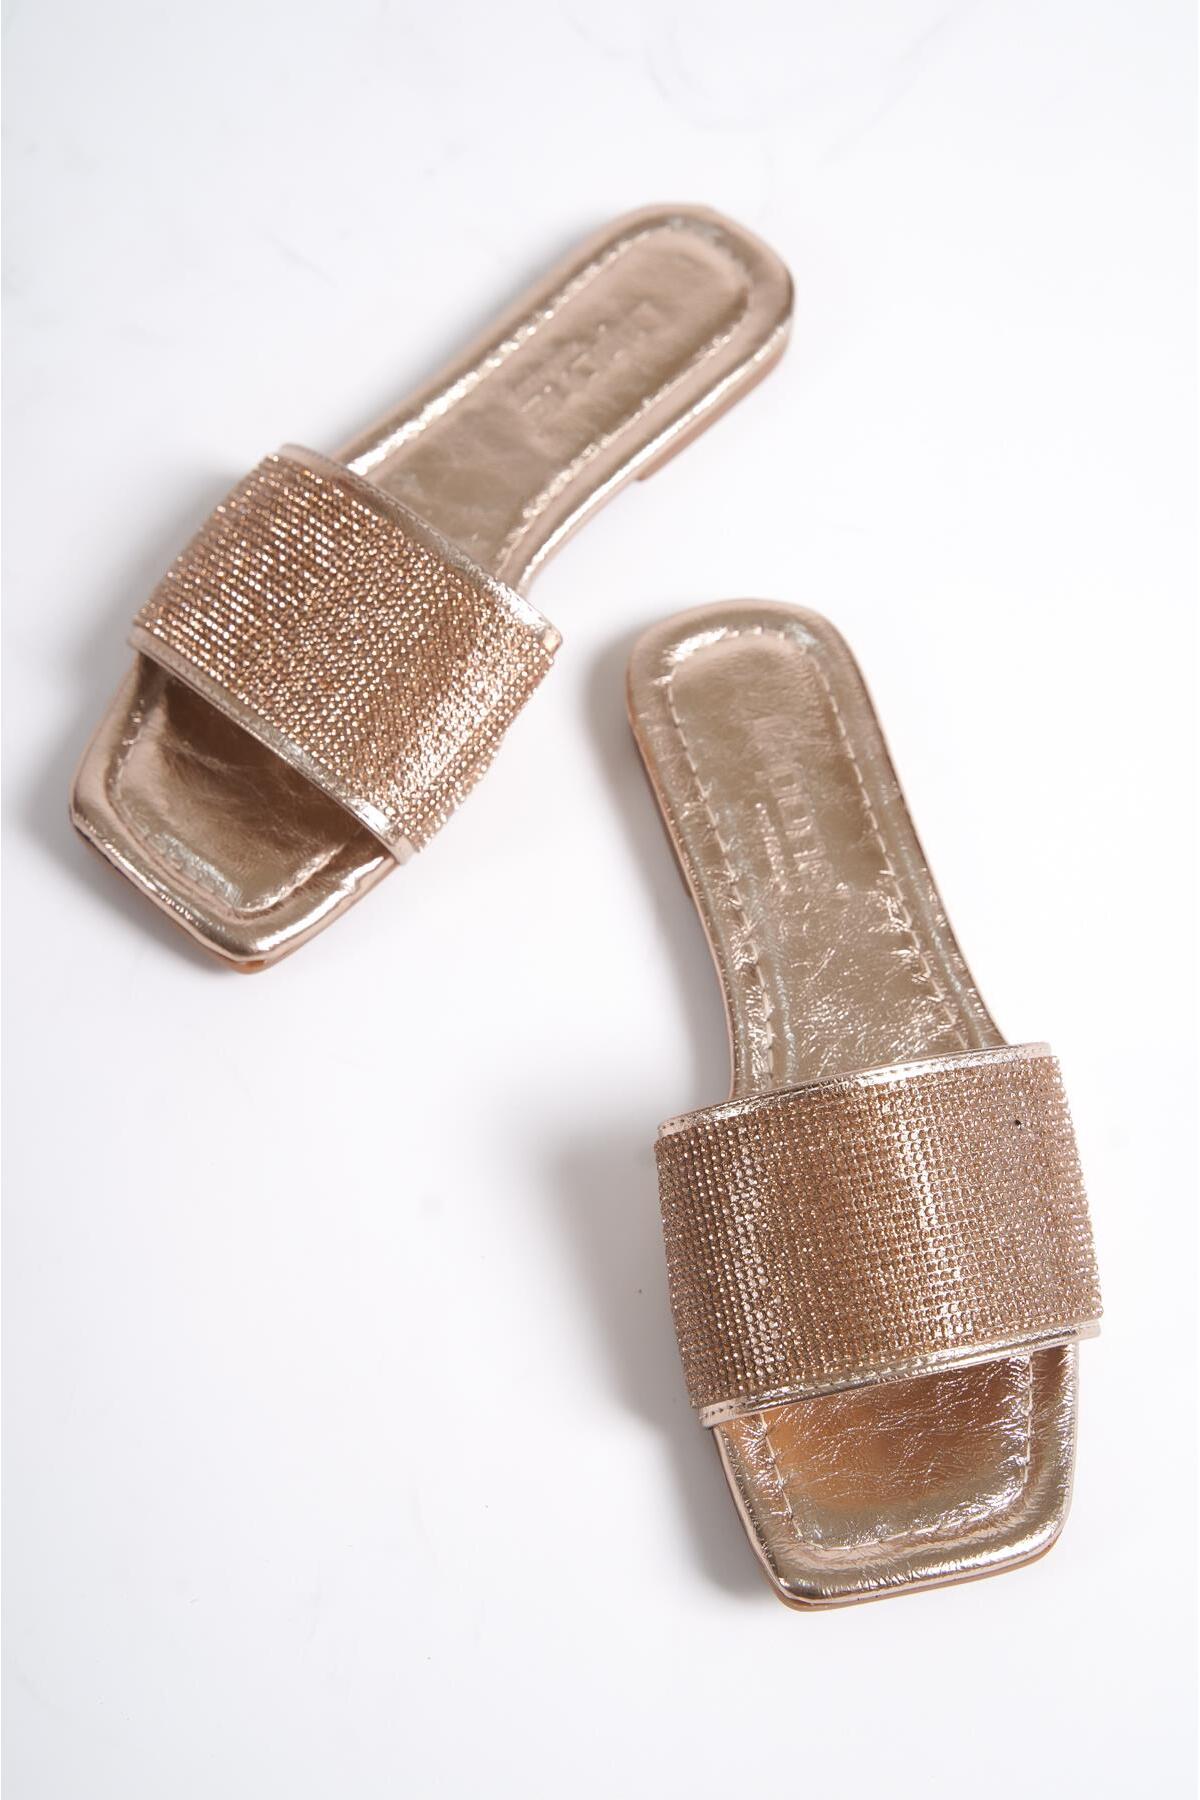 Capone Outfitters Women's Slippers with Capone Stones and Single Strap, Flat Heel.